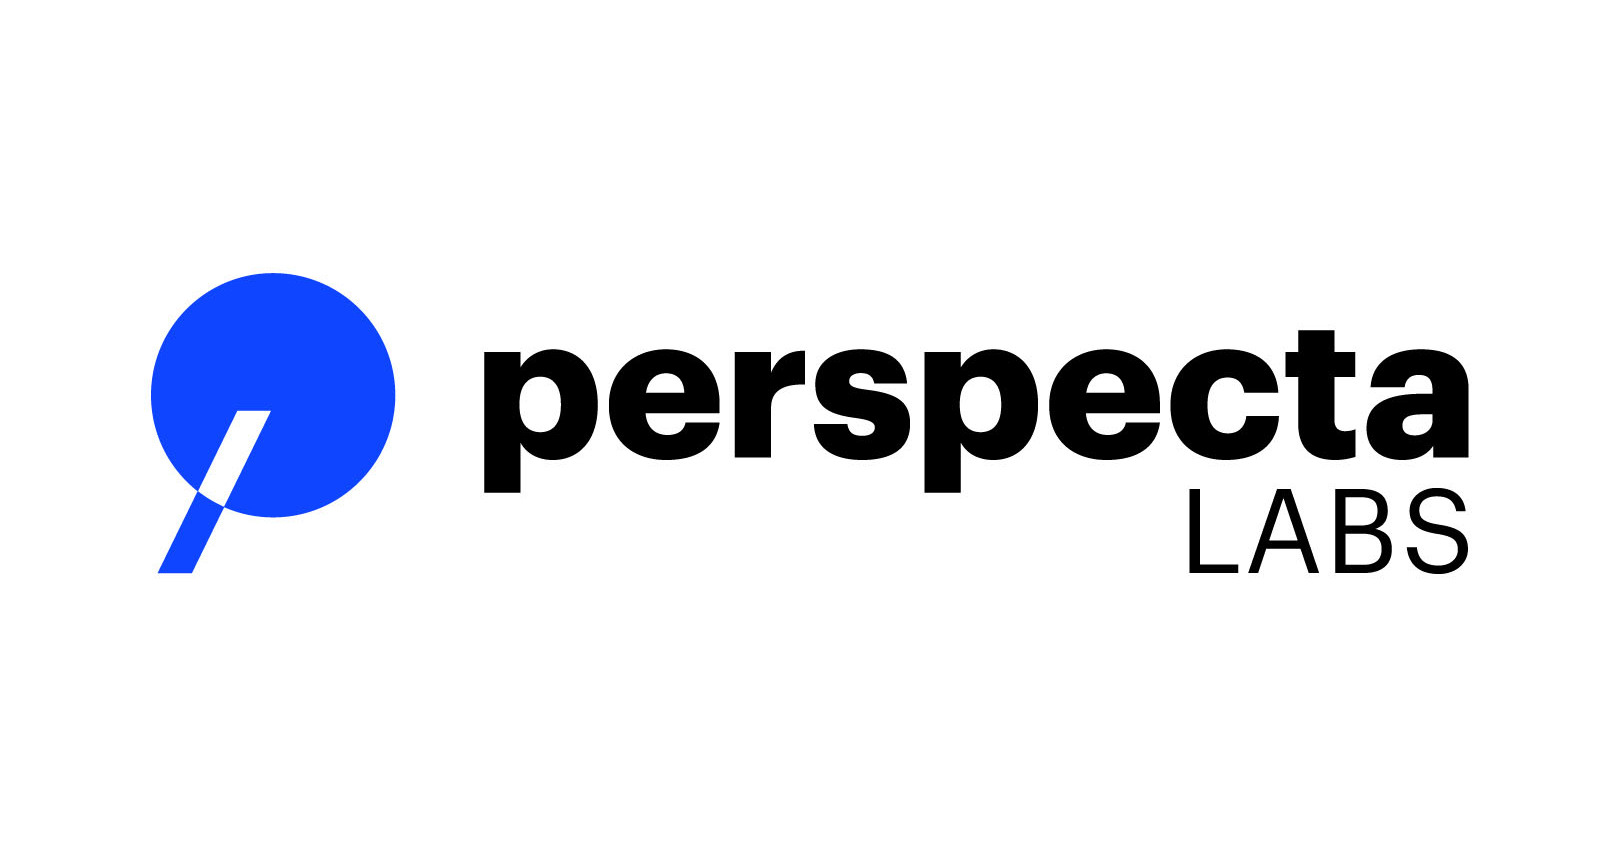 Perspecta Labs to develop and validate solution for low-cost, resilient, long-range radio communications on DARPA contract worth $18.5M